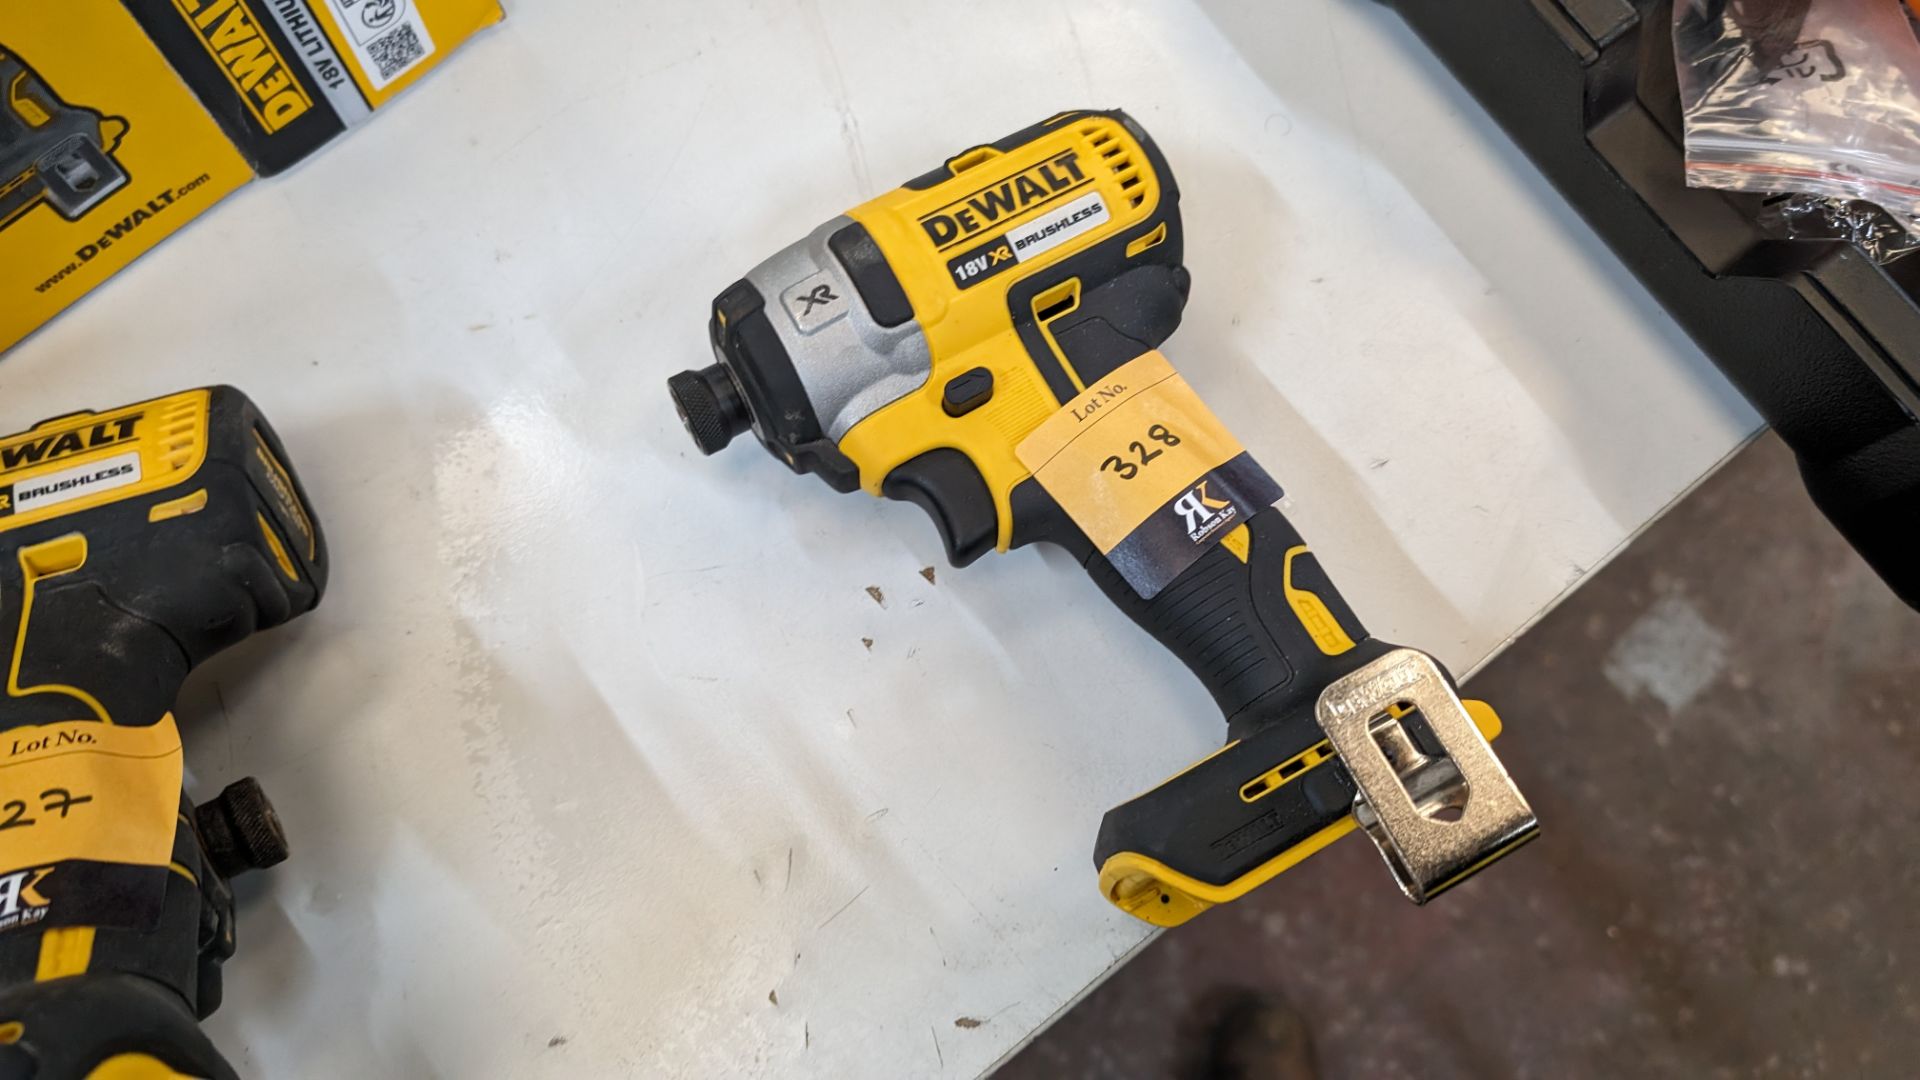 DeWalt DCF887 cordless driver - no battery or charger - Image 3 of 6